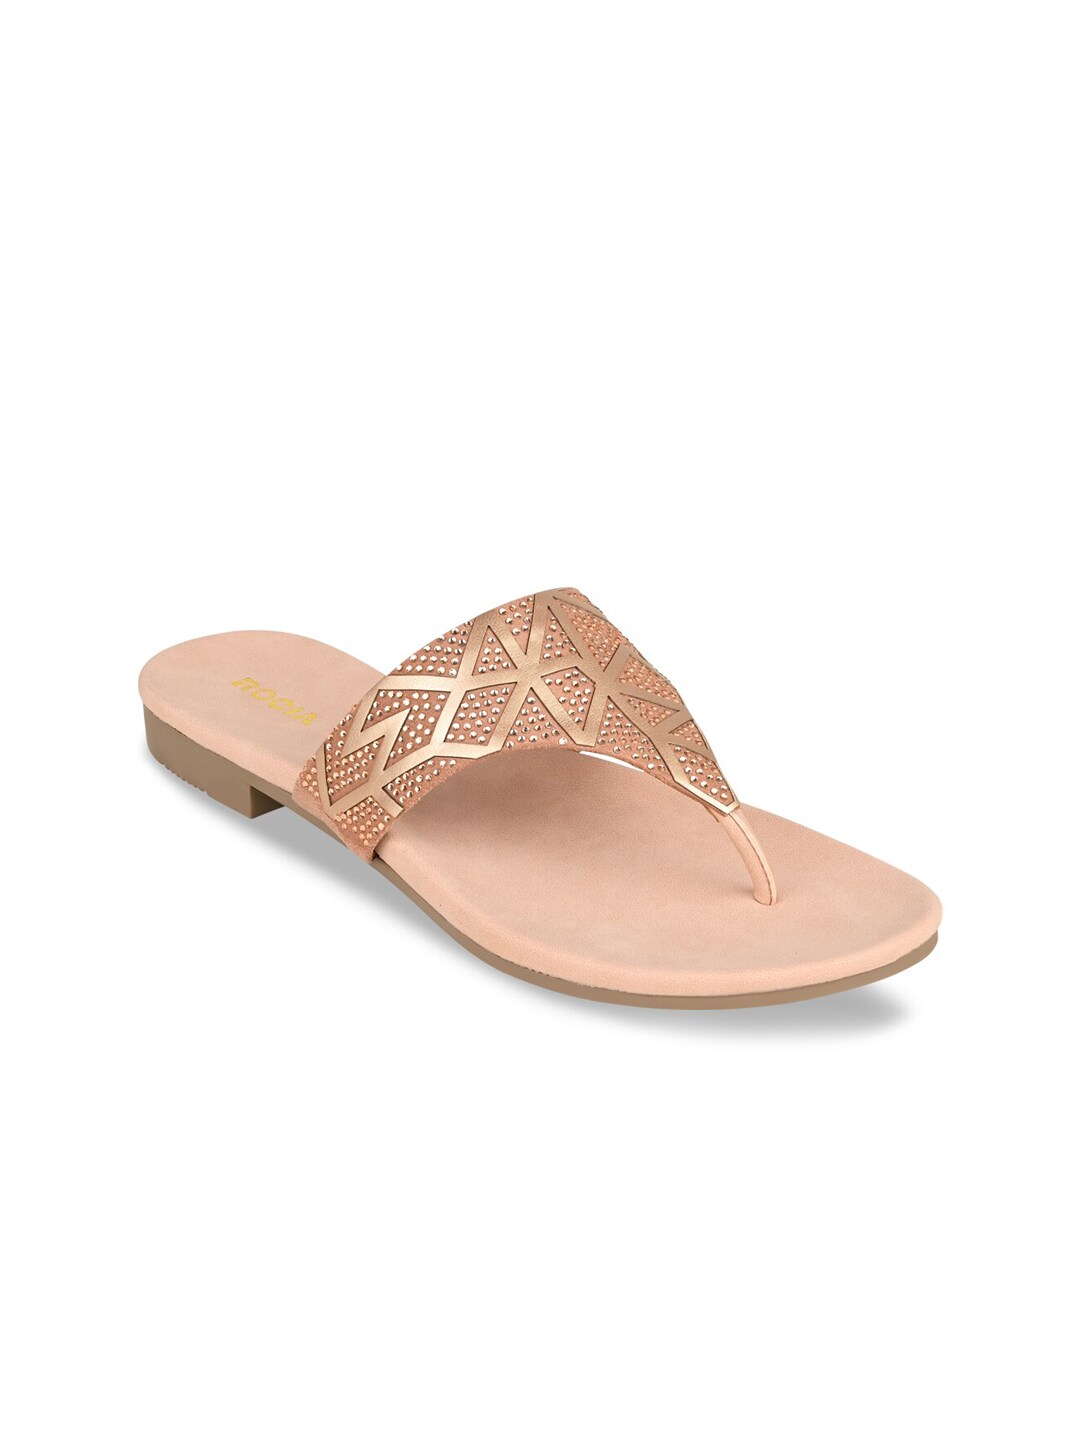 Rocia Women Embellished Ethnic T-Strap Flats Price in India